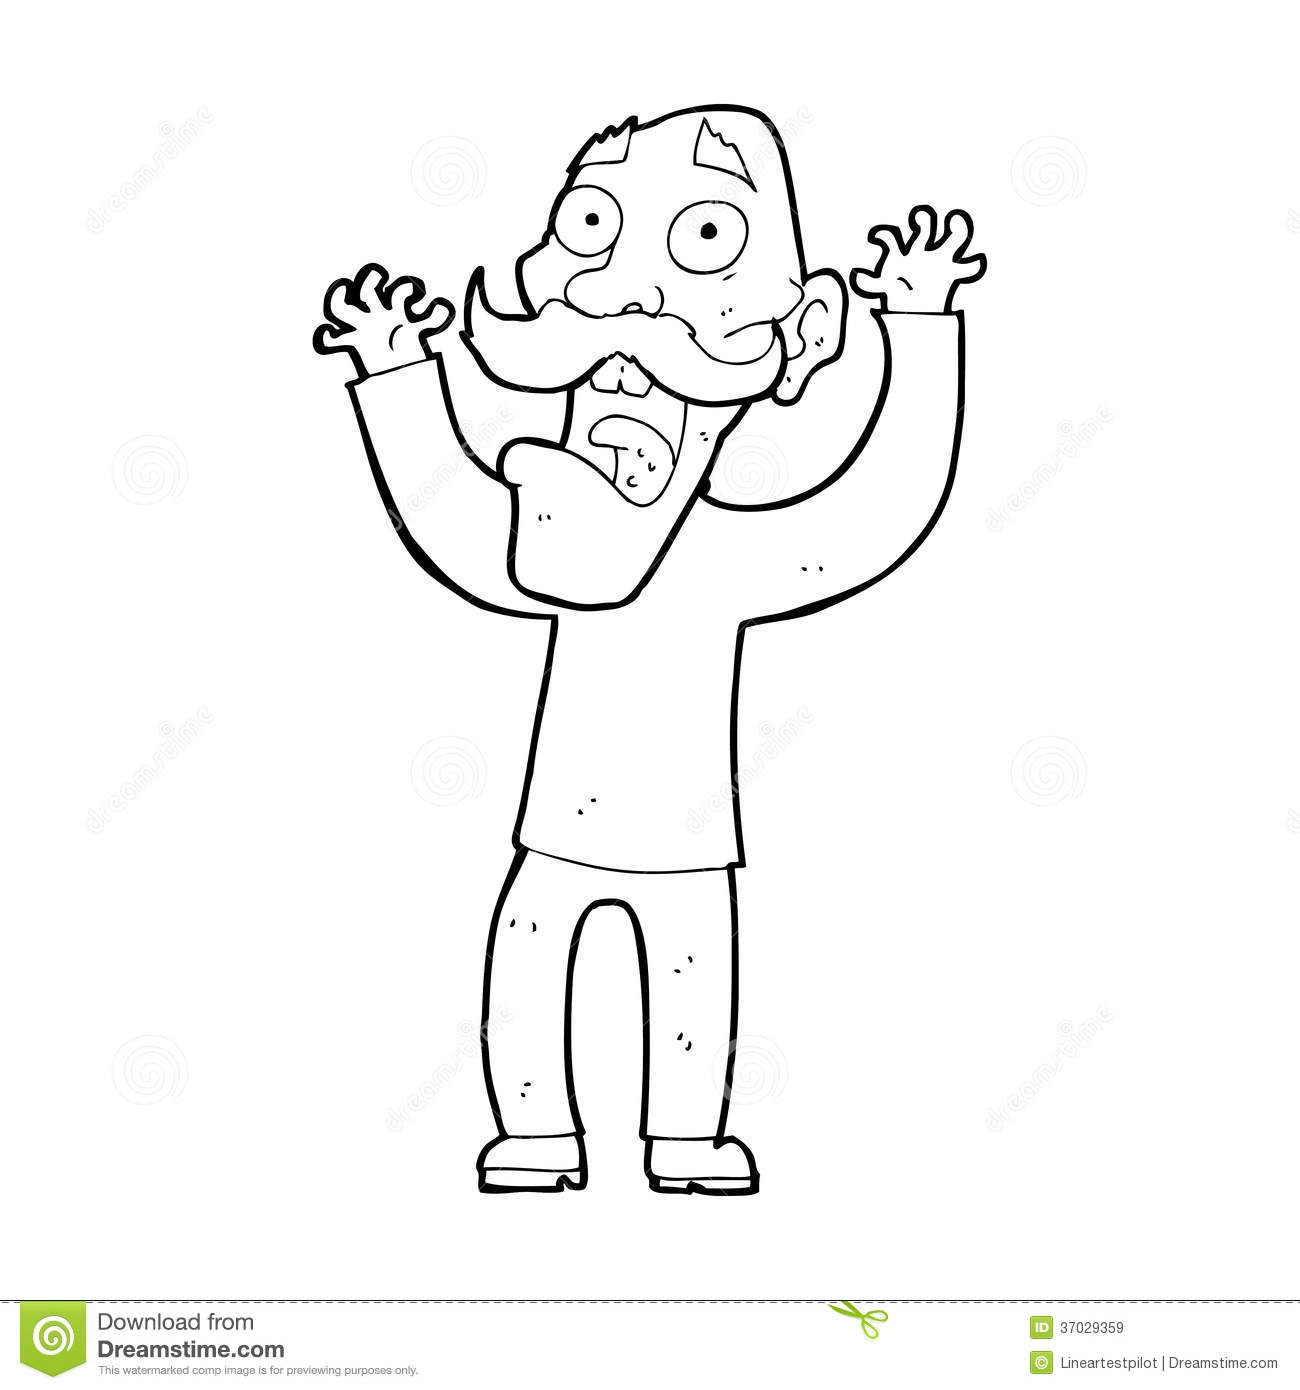 Cartoon Old Man Getting A Fright Royalty Free Stock Images   Image    